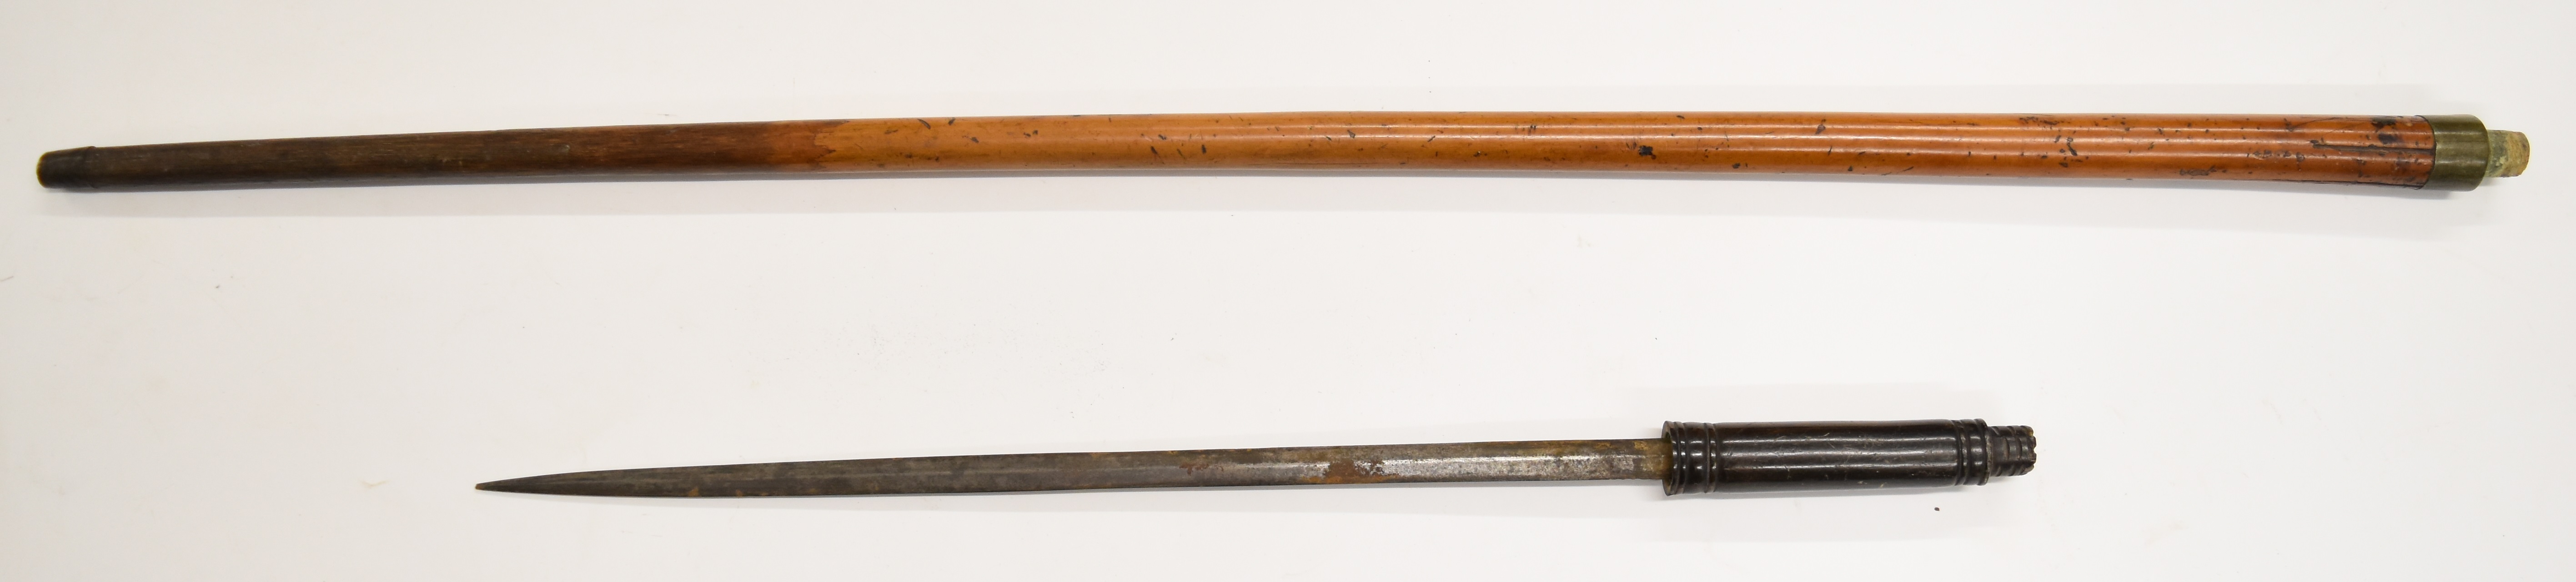 Swordstick with 36.5cm blade, overall length 89cm. PLEASE NOTE ALL BLADED ITEMS ARE SUBJECT TO